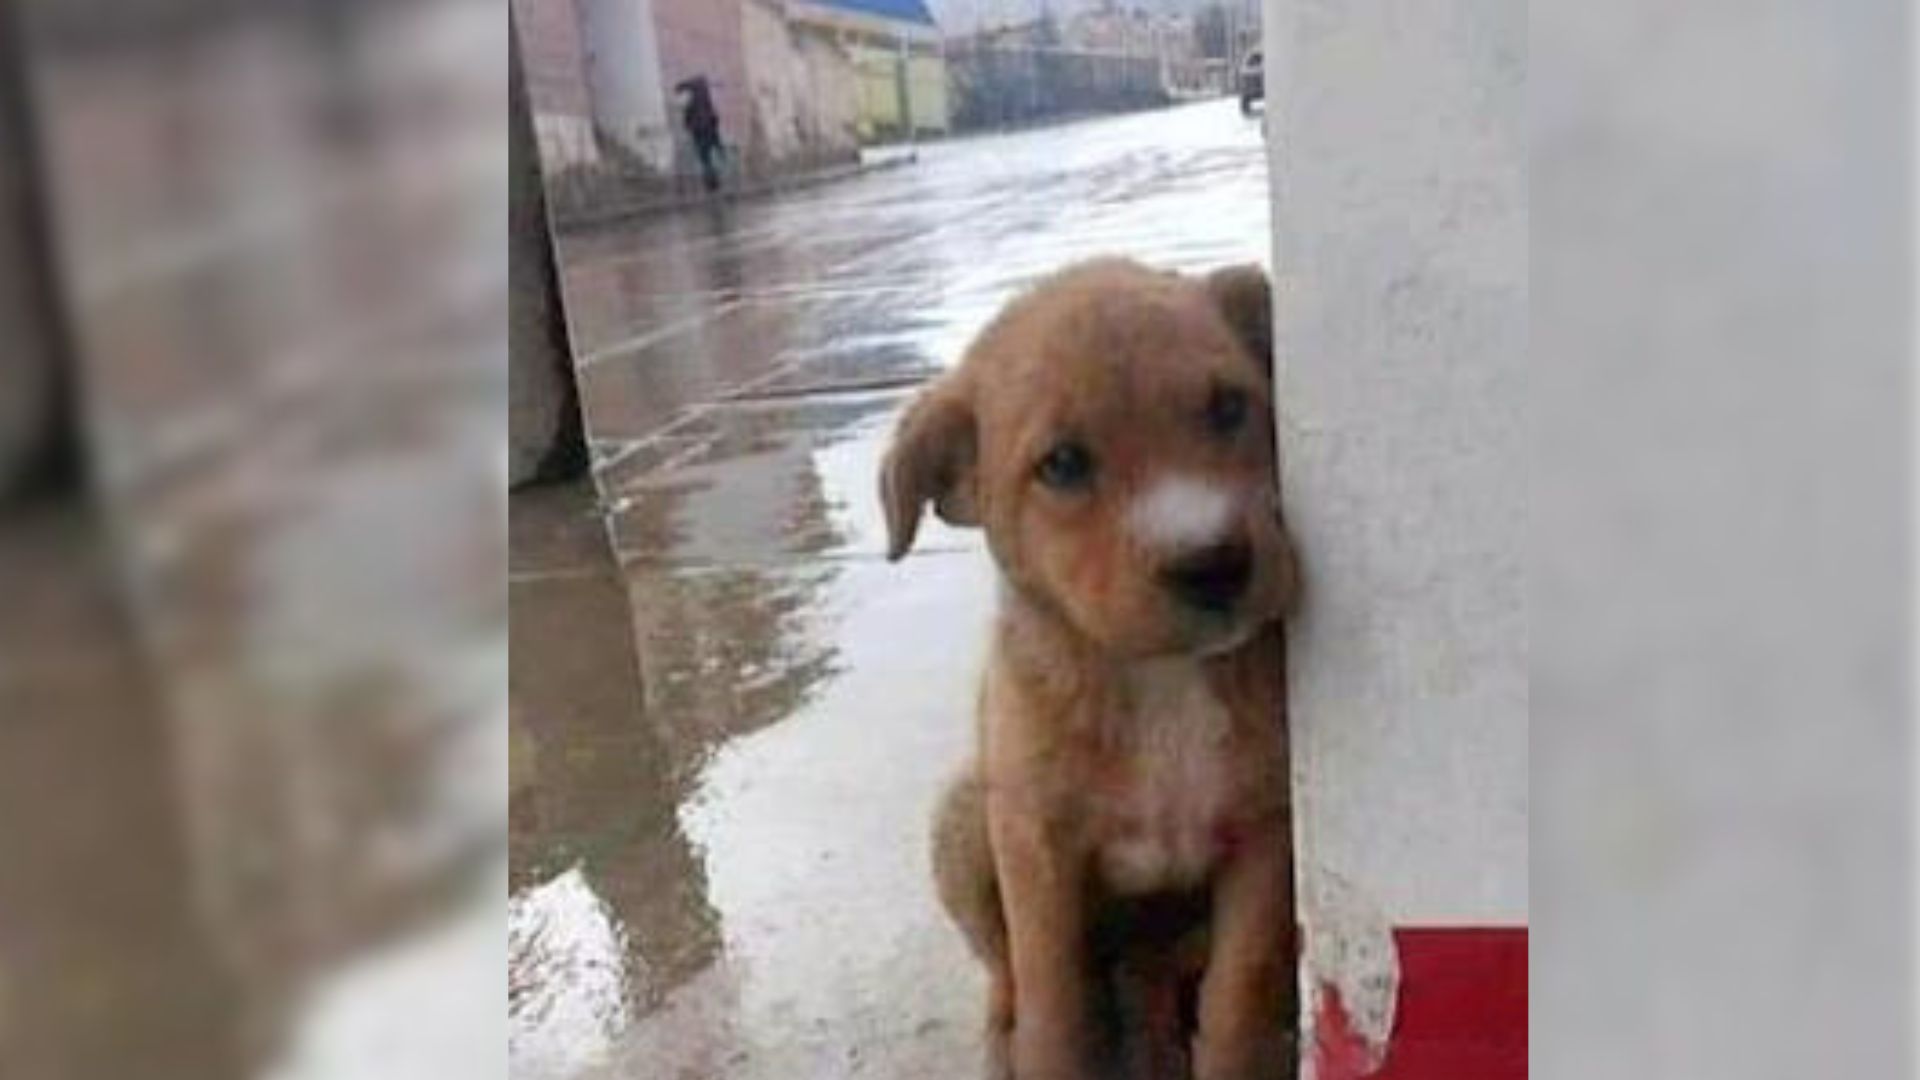 Puppy With Extremely Swollen Paws Hid Behind A Wall Hoping That A Kind Soul Would Offer A Helping Hand